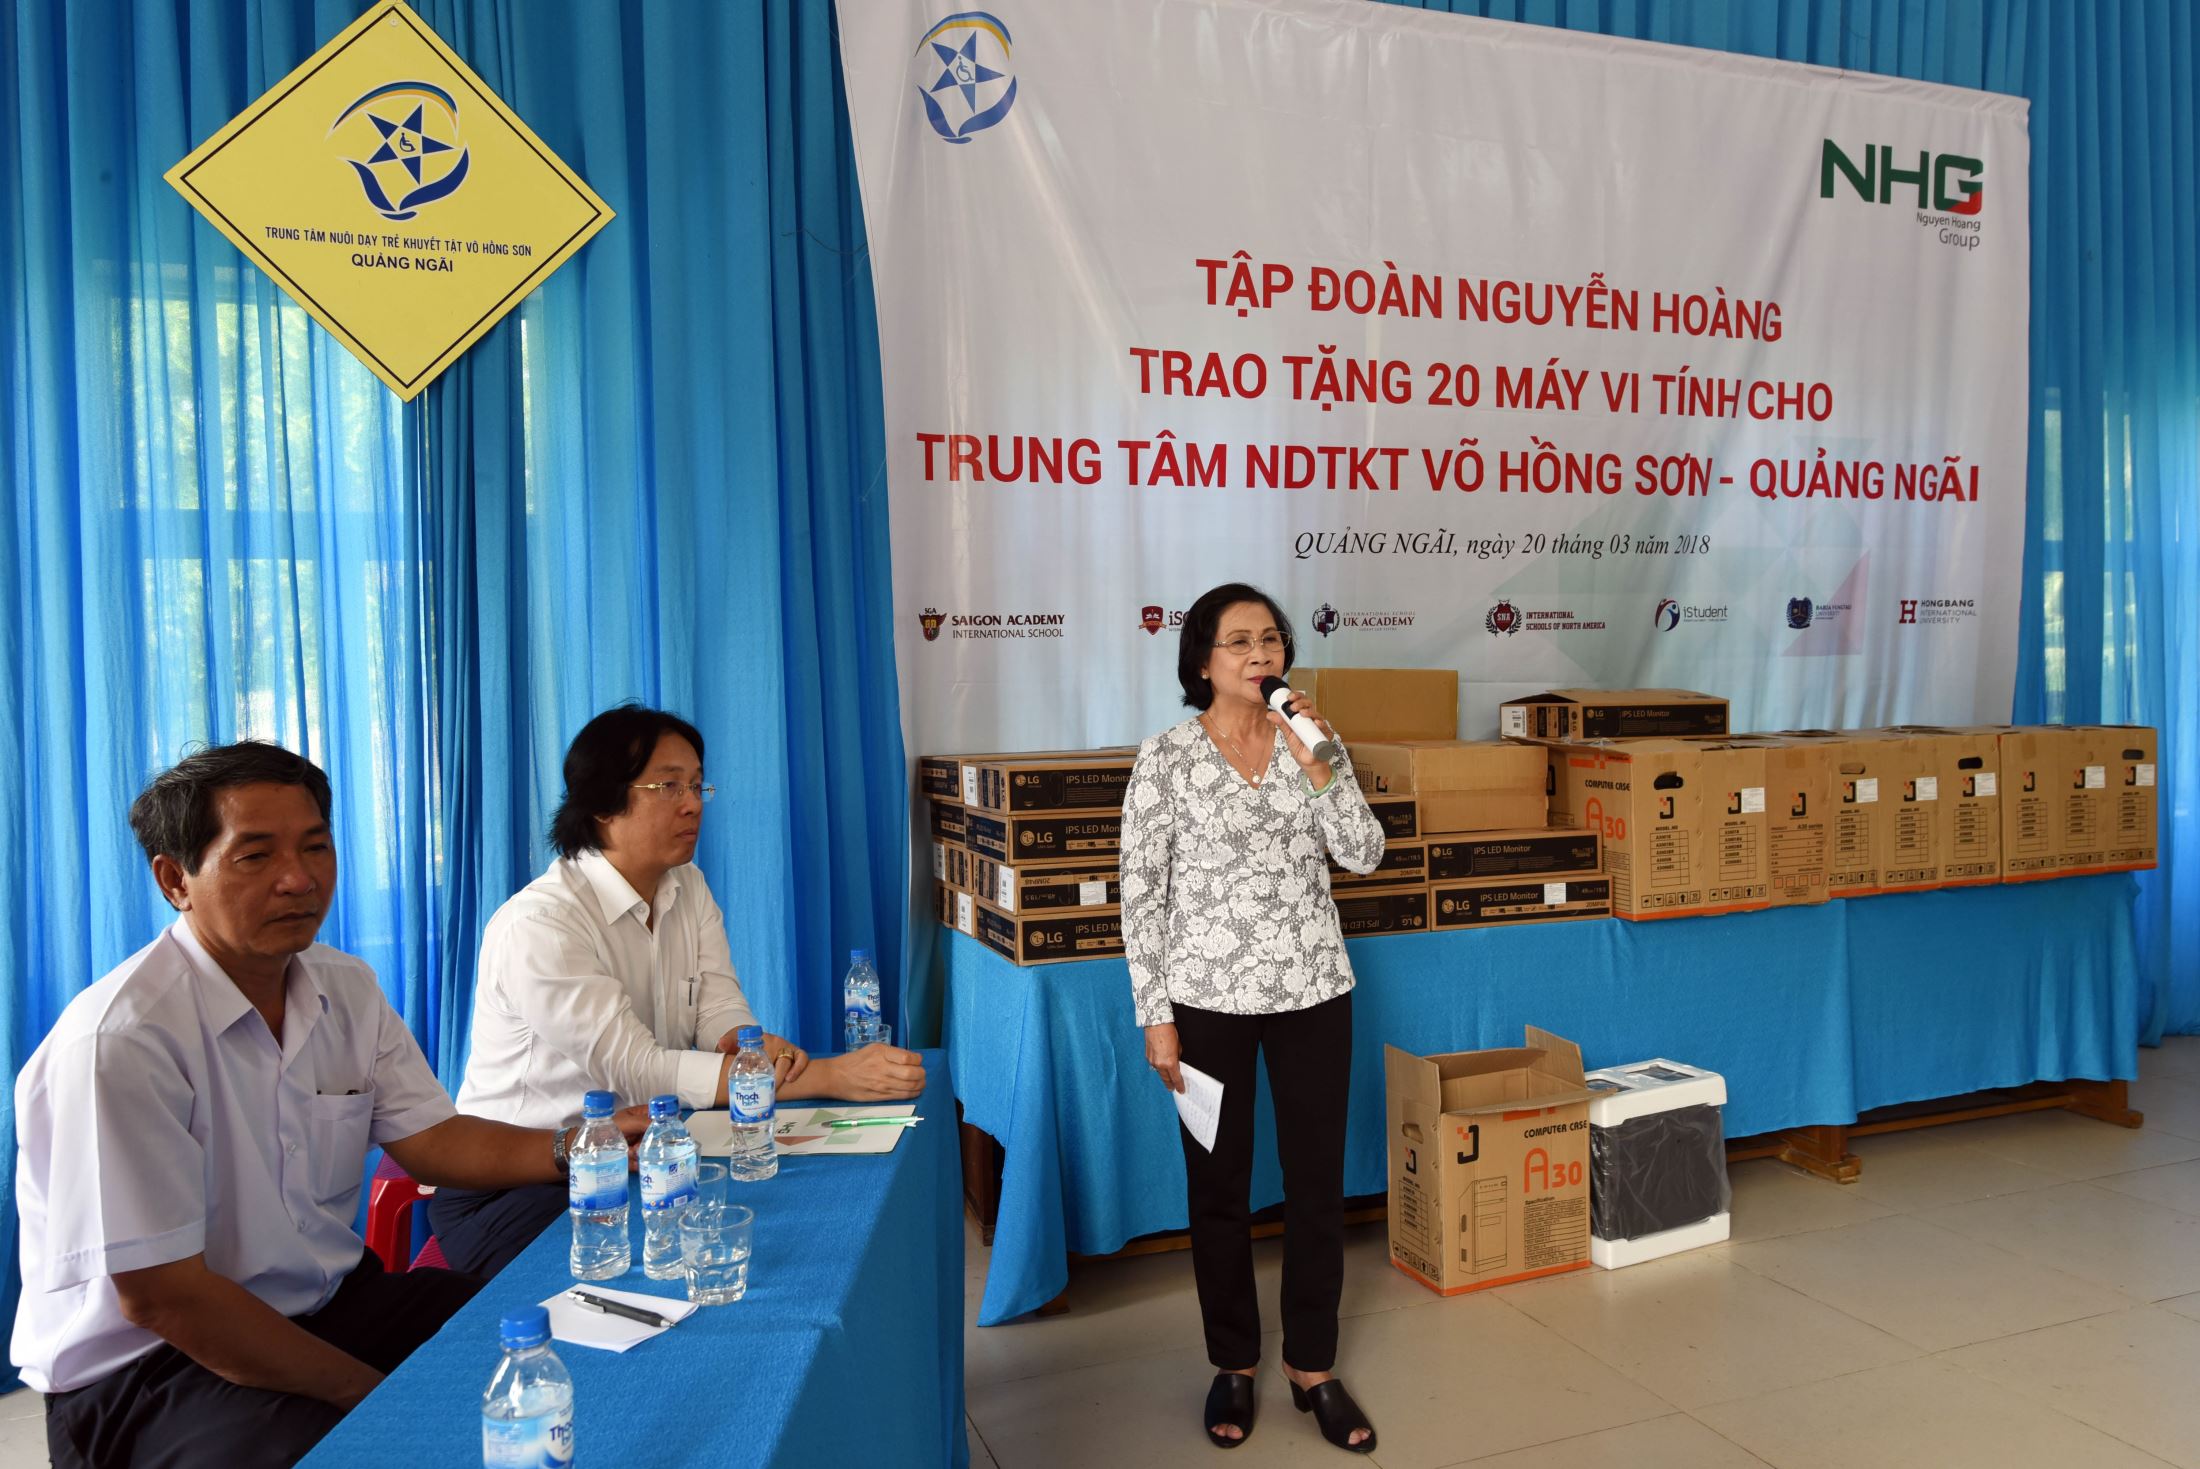 Ms. Nguyen Thi Thu Ha, Director of the center giving a thank-you speech to Nguyen Hoang Group